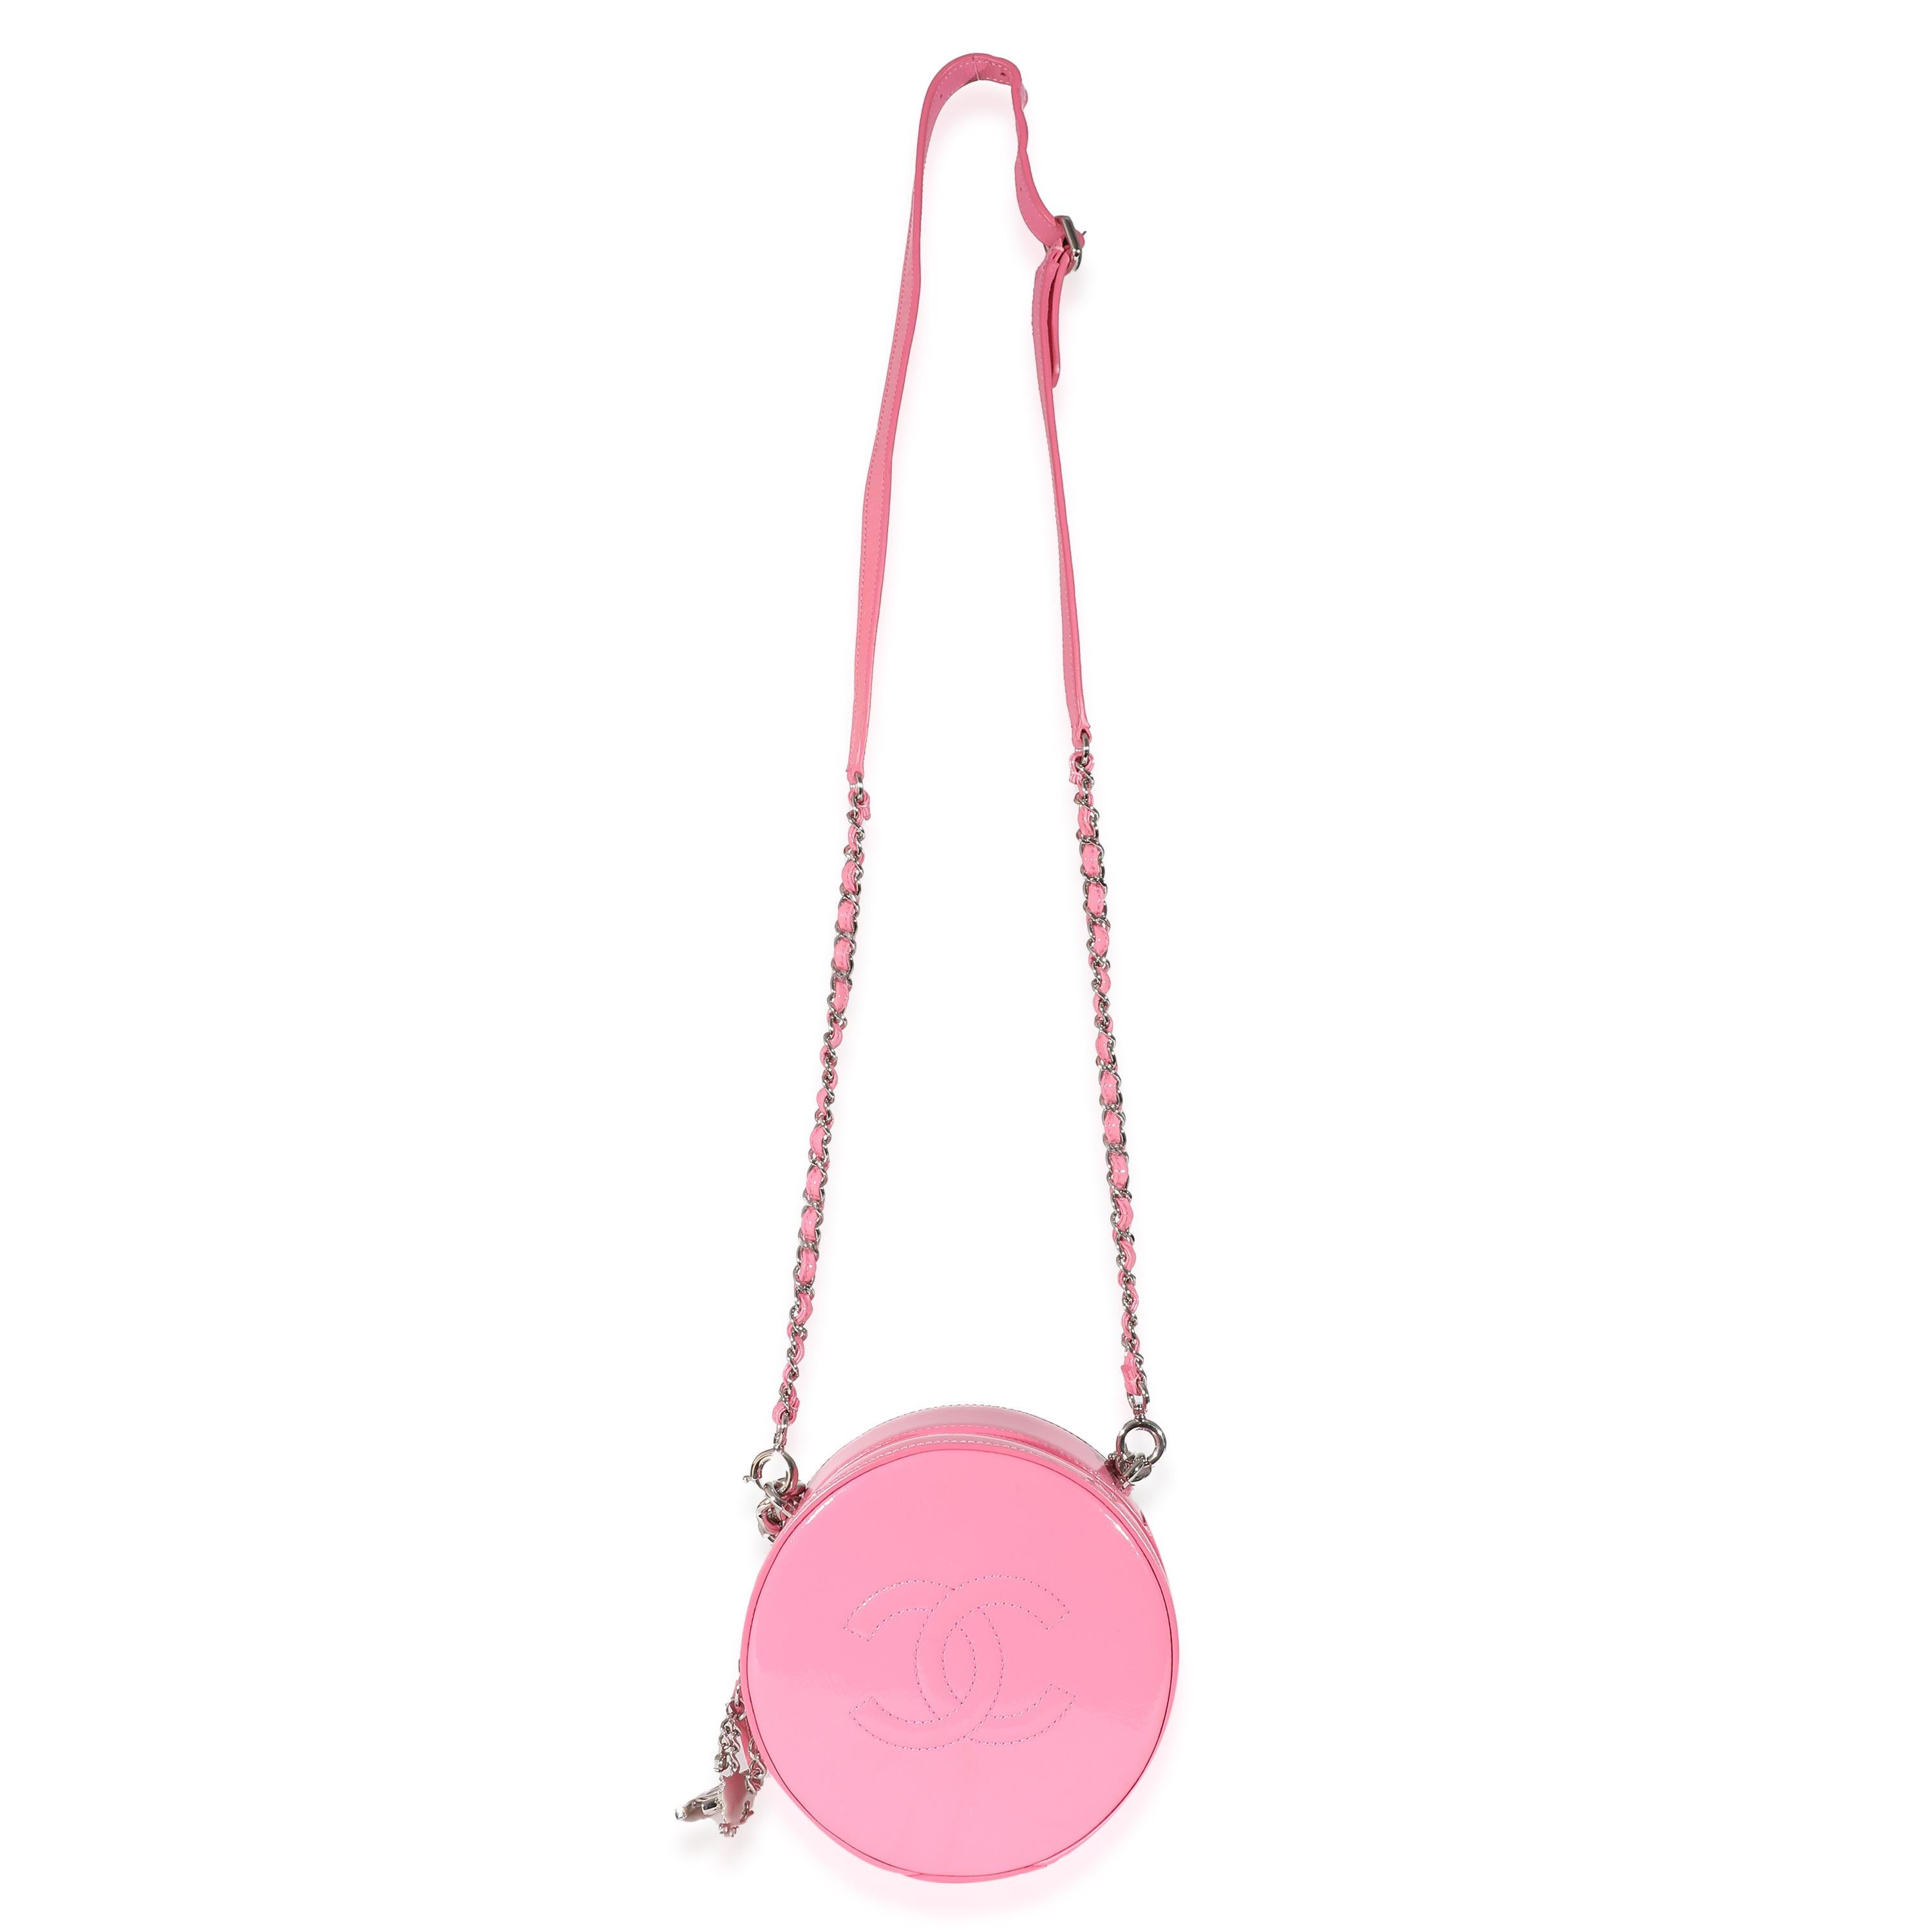 Listing Title: Chanel Pink Patent CC Round As Earth Bag
SKU: 135584
Condition: Pre-owned 
Handbag Condition: Excellent
Condition Comments: Item is in excellent condition and displays light signs of wear. Faint scuffing along interior surface.